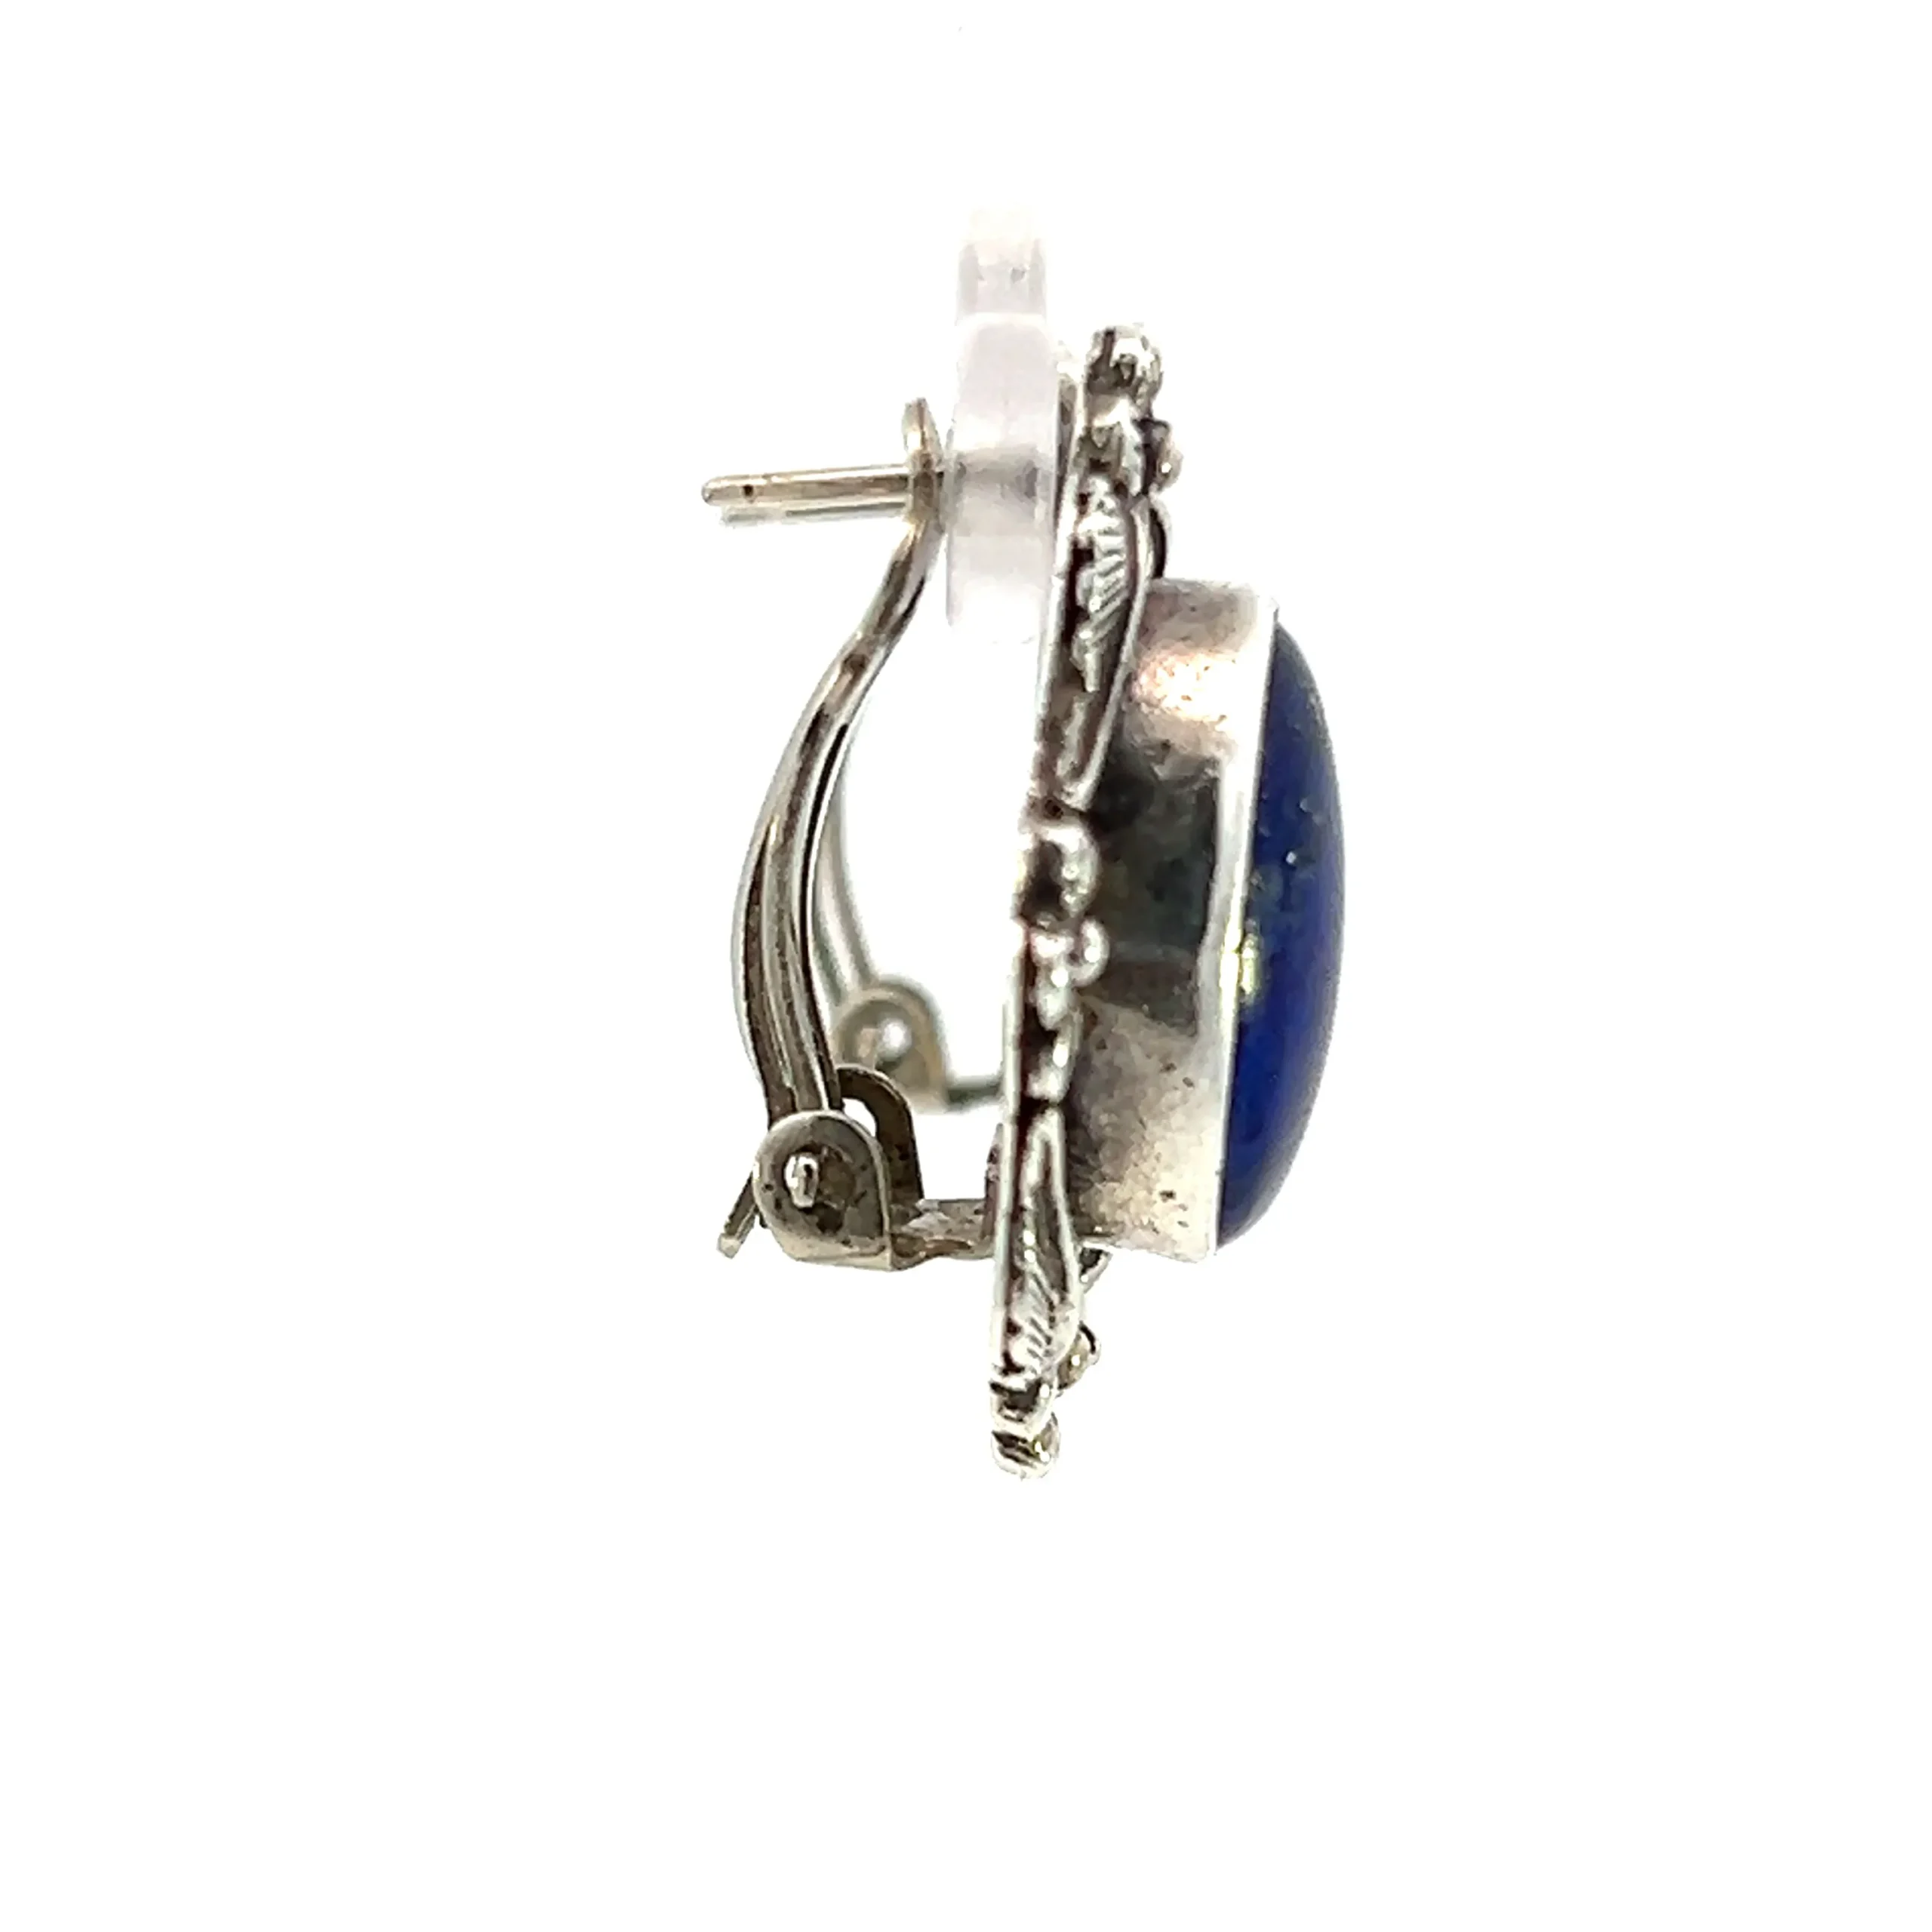 One estate vintage pair of sterling silver stud earrings containing oval cabochon lapis lazuli in a bezel setting surrounded by a curving frame with silver flower accents at each cardinal point. The earrings are secured with omega style backs. Each earring measures 28x25mm.